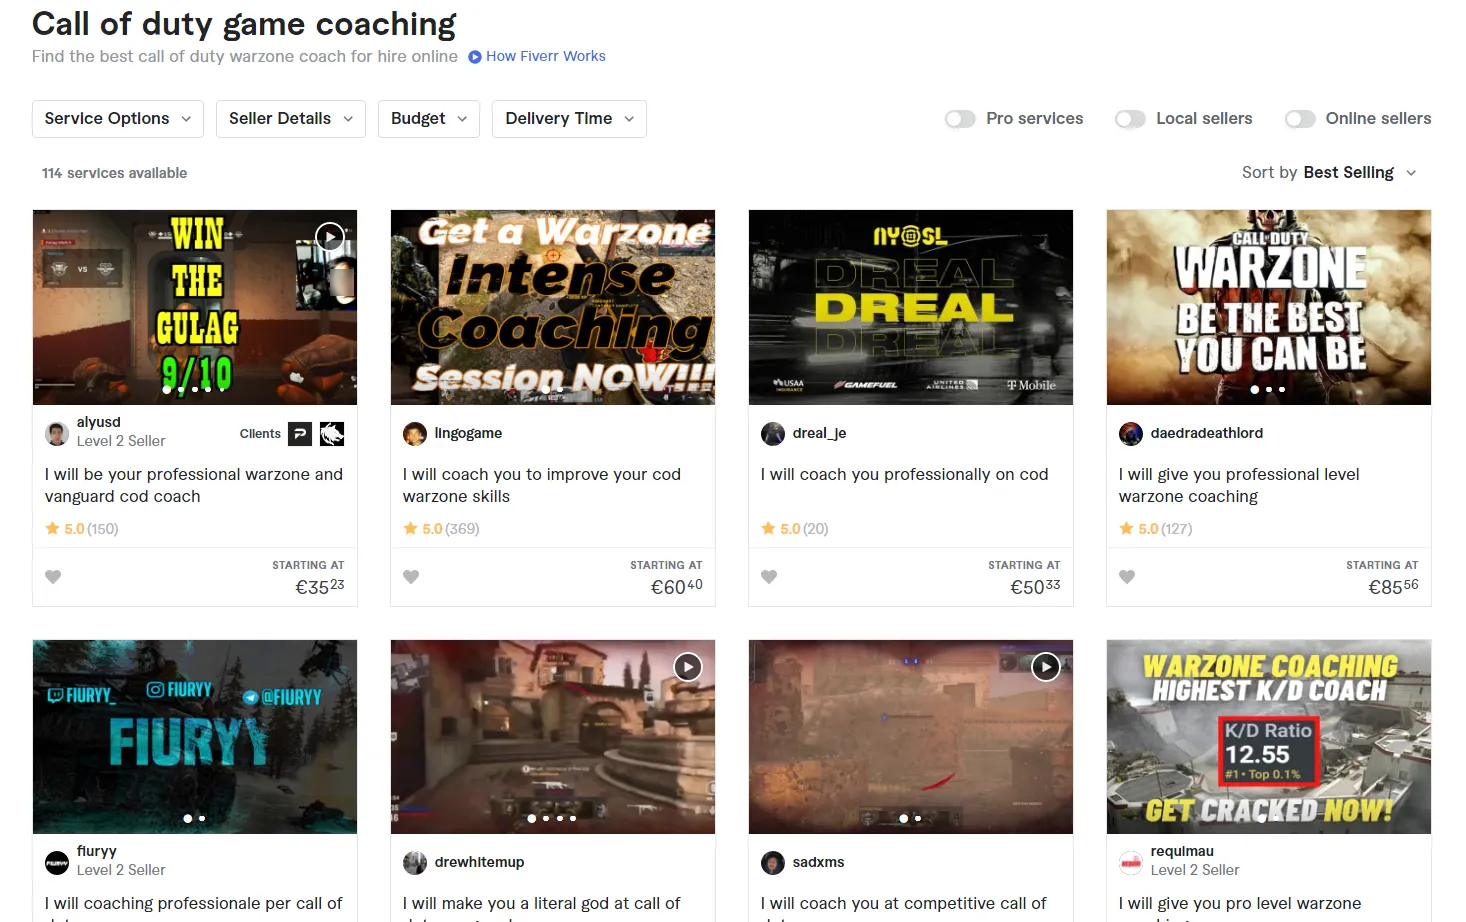 You can see how much money top-rated COD Warzone coaches can get per gig.